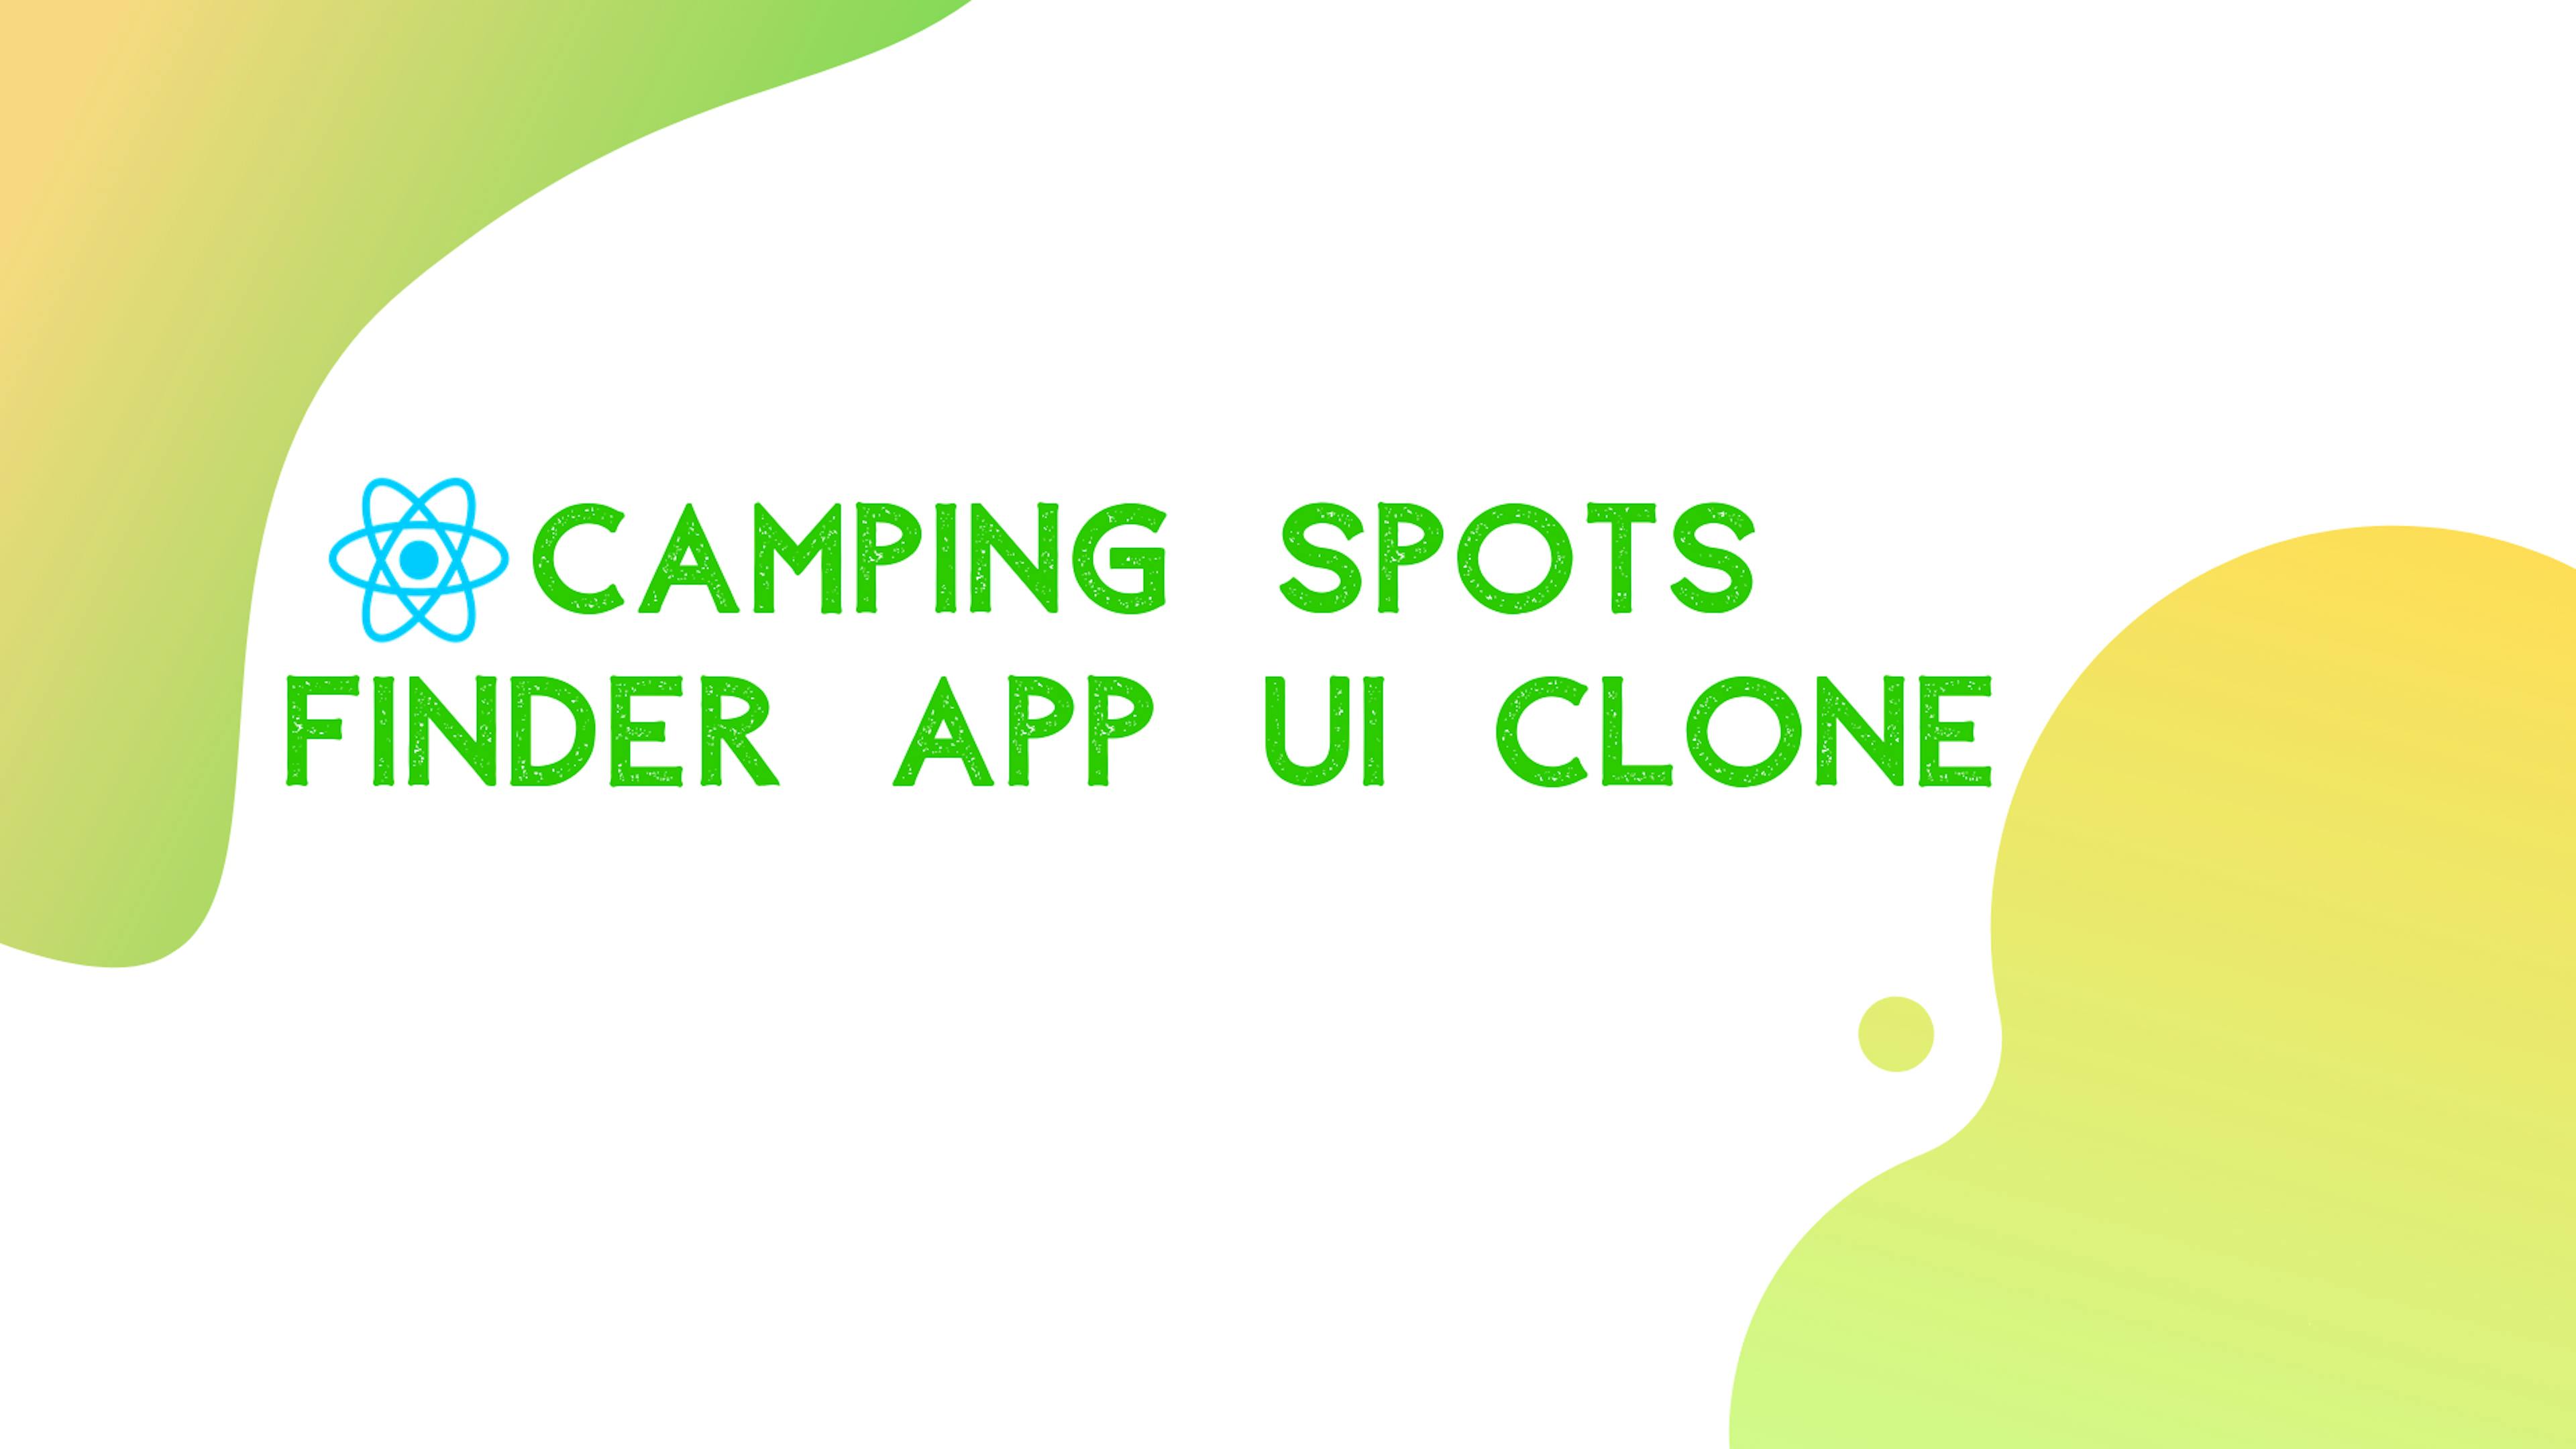 featured image - [React Native Development] Camping Spots Finder App UI Clone Part I - Map view UI